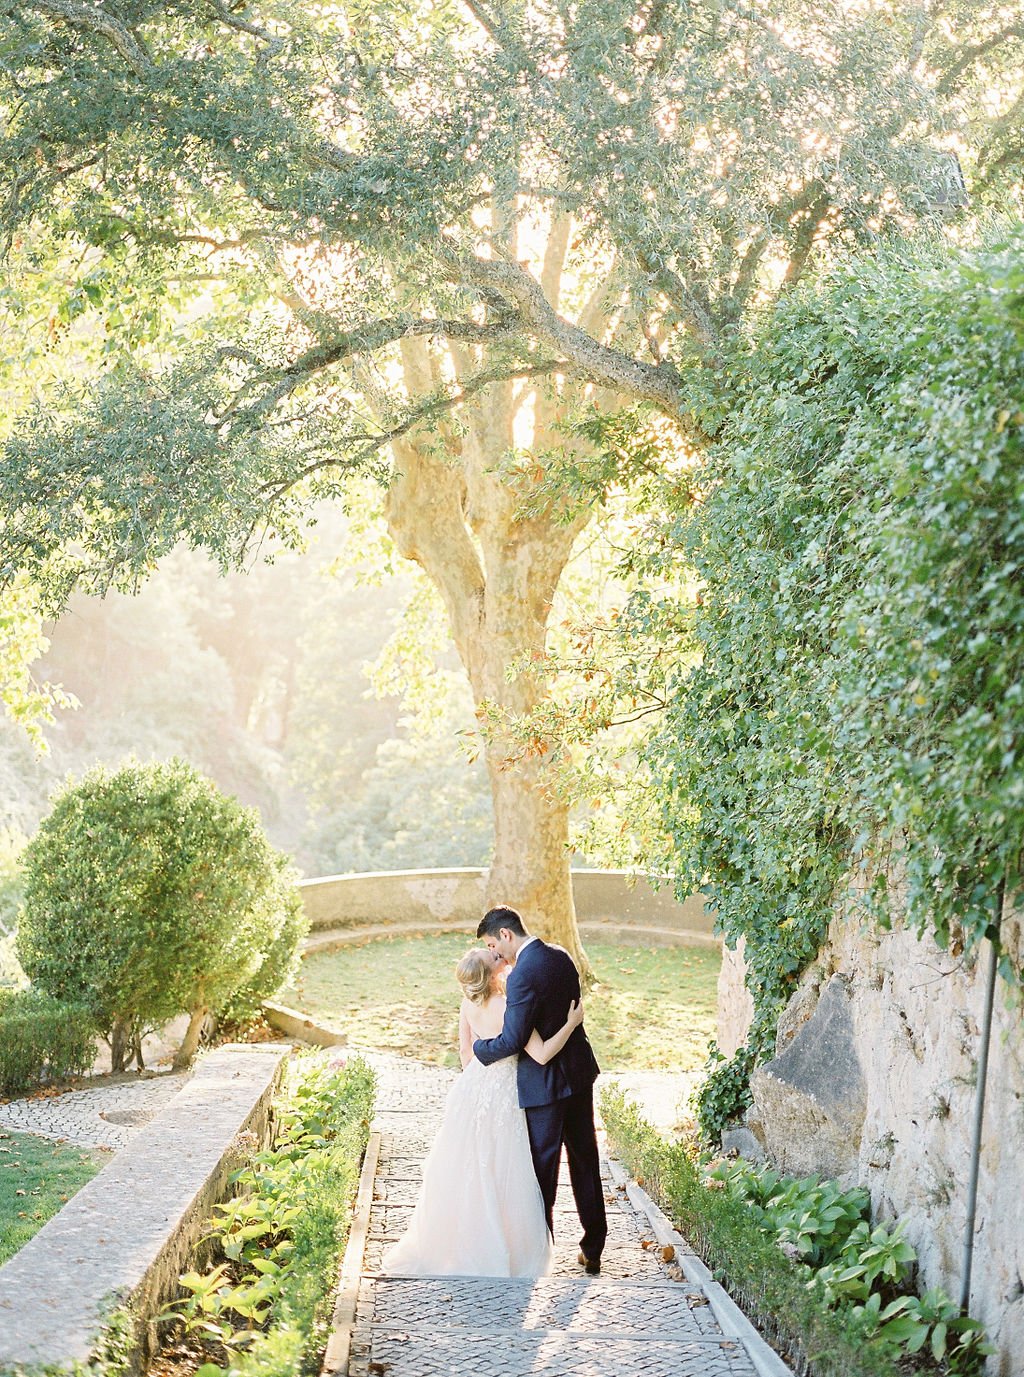 Bride and groom kissing in one of the most iconic paths behind Palácio de Seteais in the garden, on the stairs, in the golden light of a warm summer day